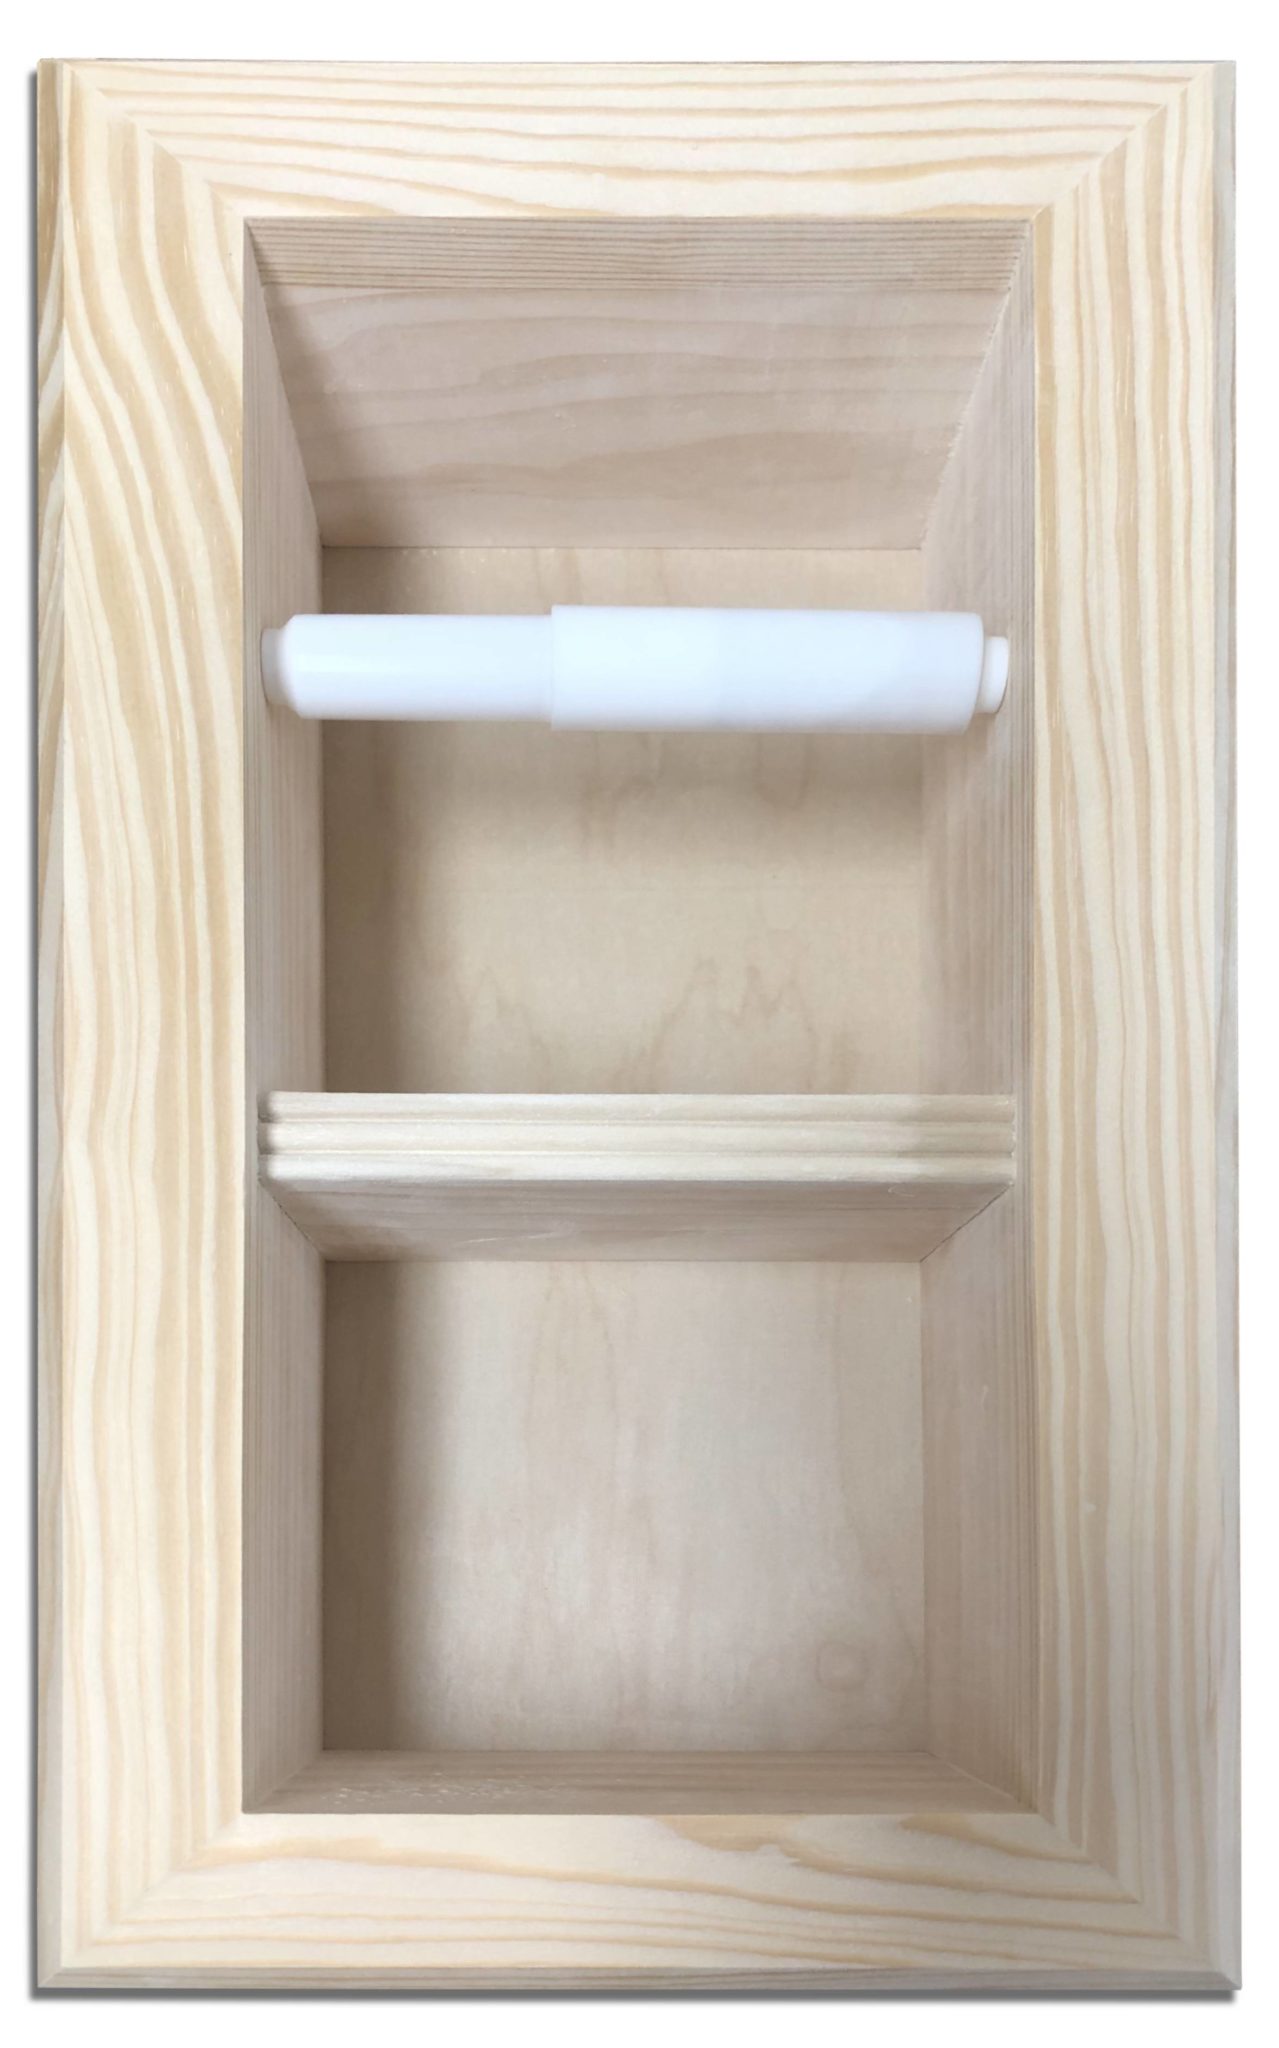 Brentwood-18 recessed in wall solid wood double toilet paper holder - holds  any size rolls - 7 x 14.5